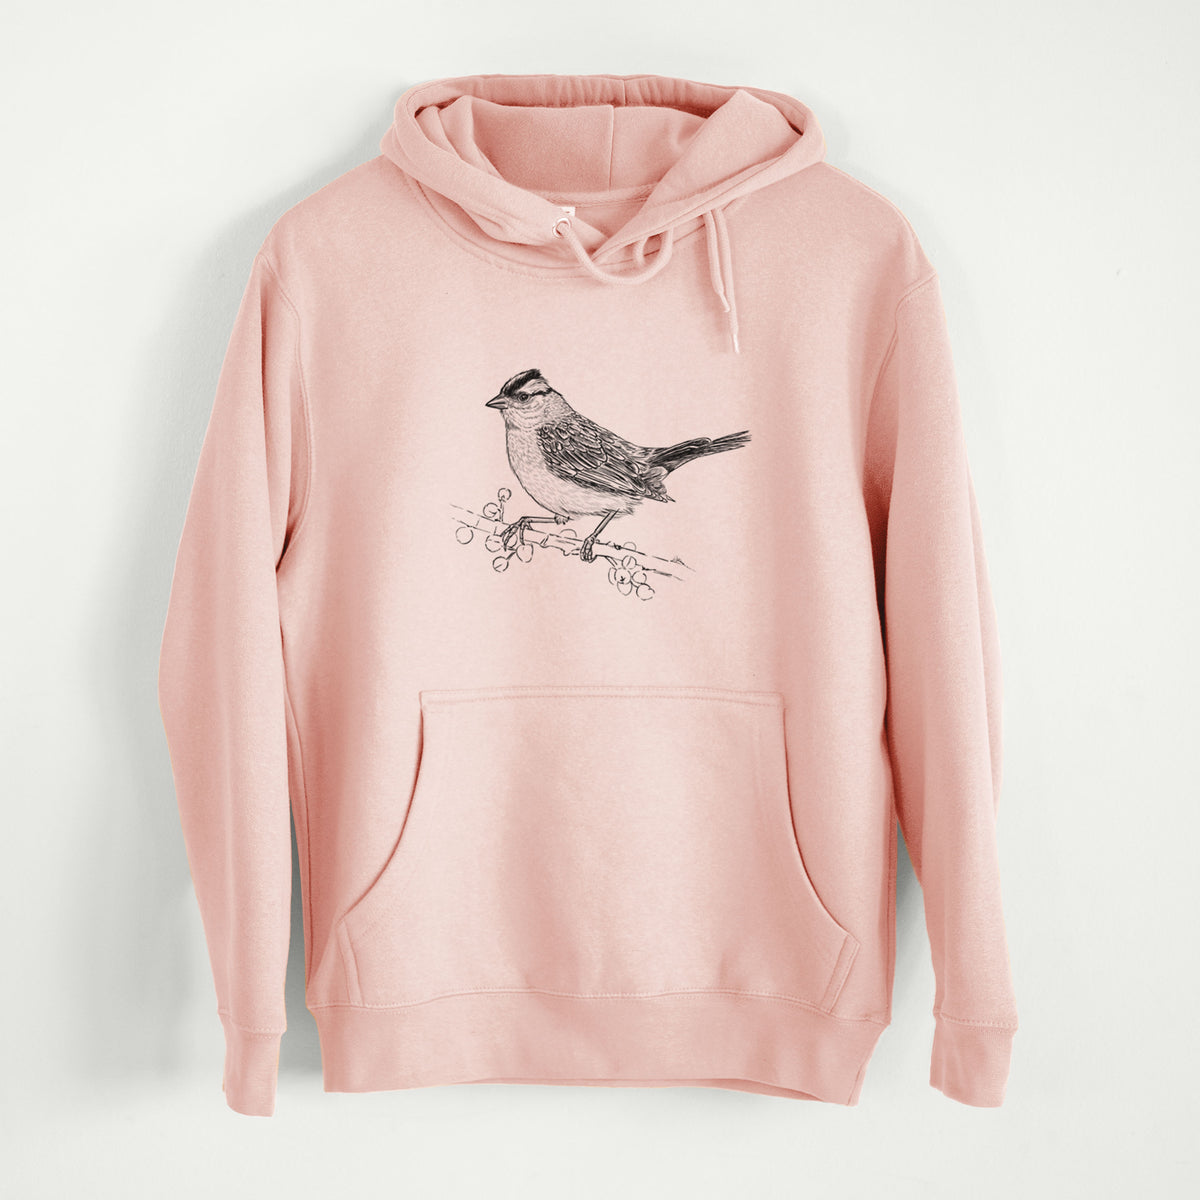 White-crowned Sparrow - Zonotrichia leucophrys  - Mid-Weight Unisex Premium Blend Hoodie